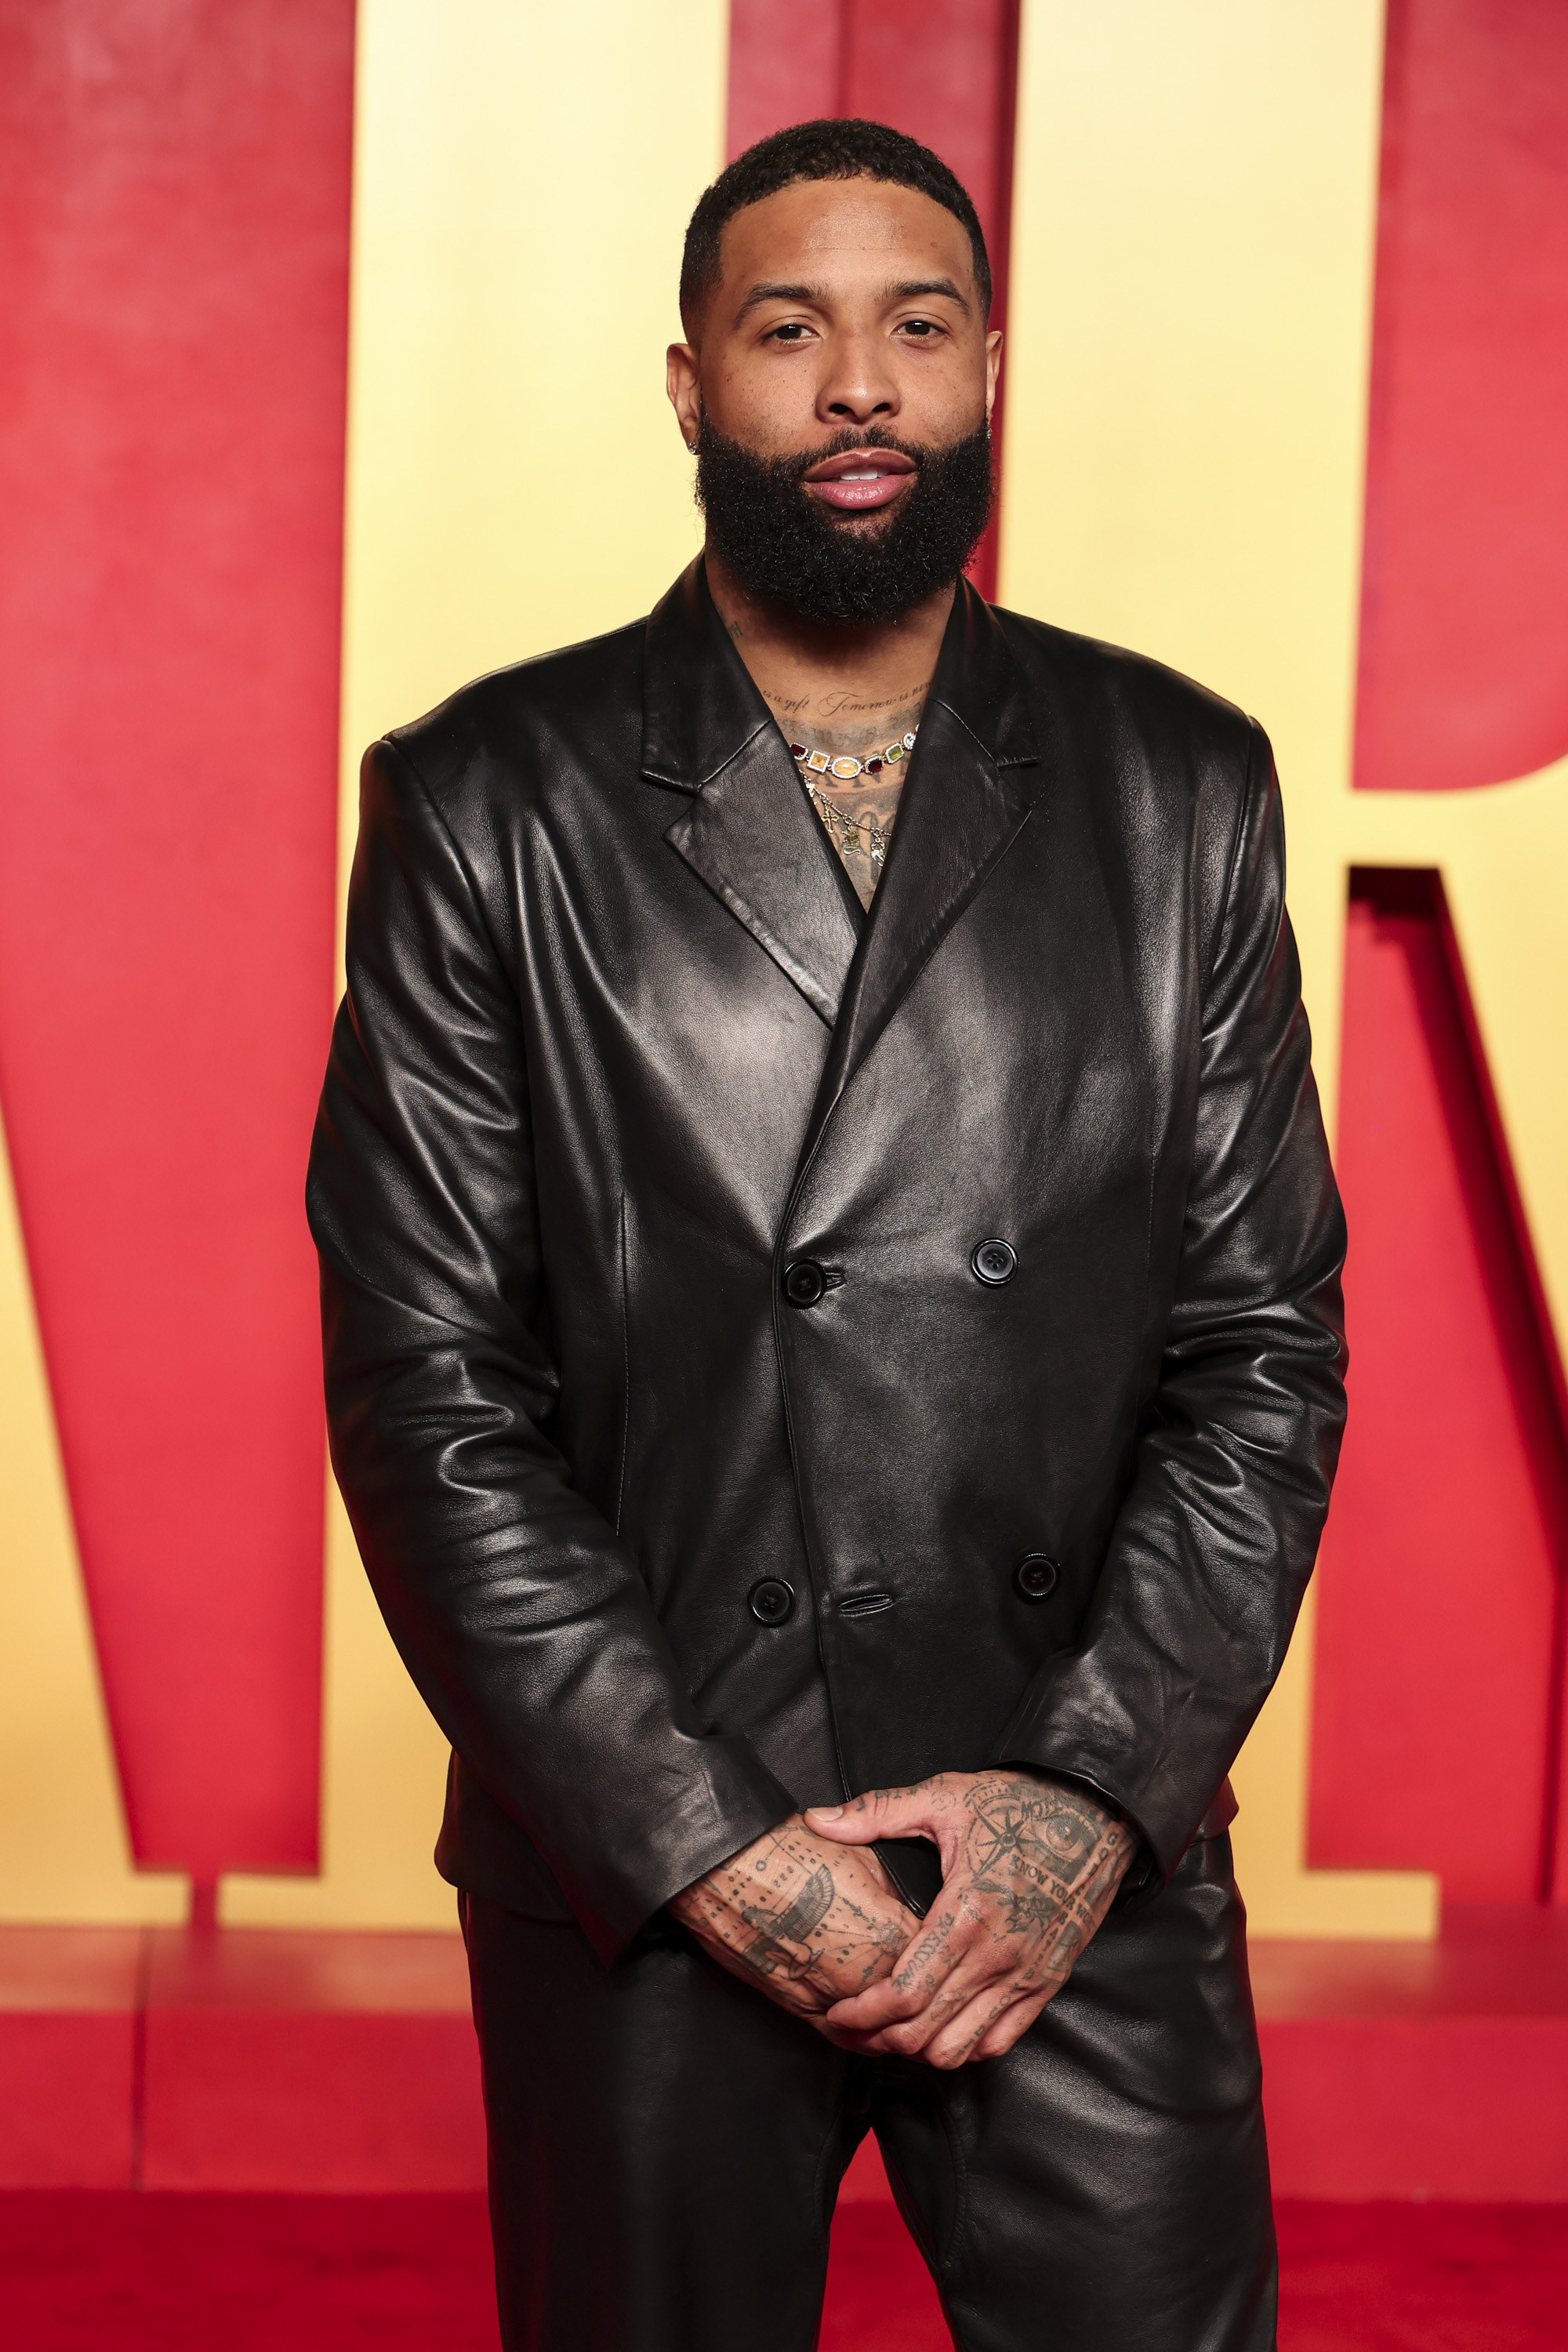 Odell was spotted wearing a similar suit to Kanye West when he attended the same party